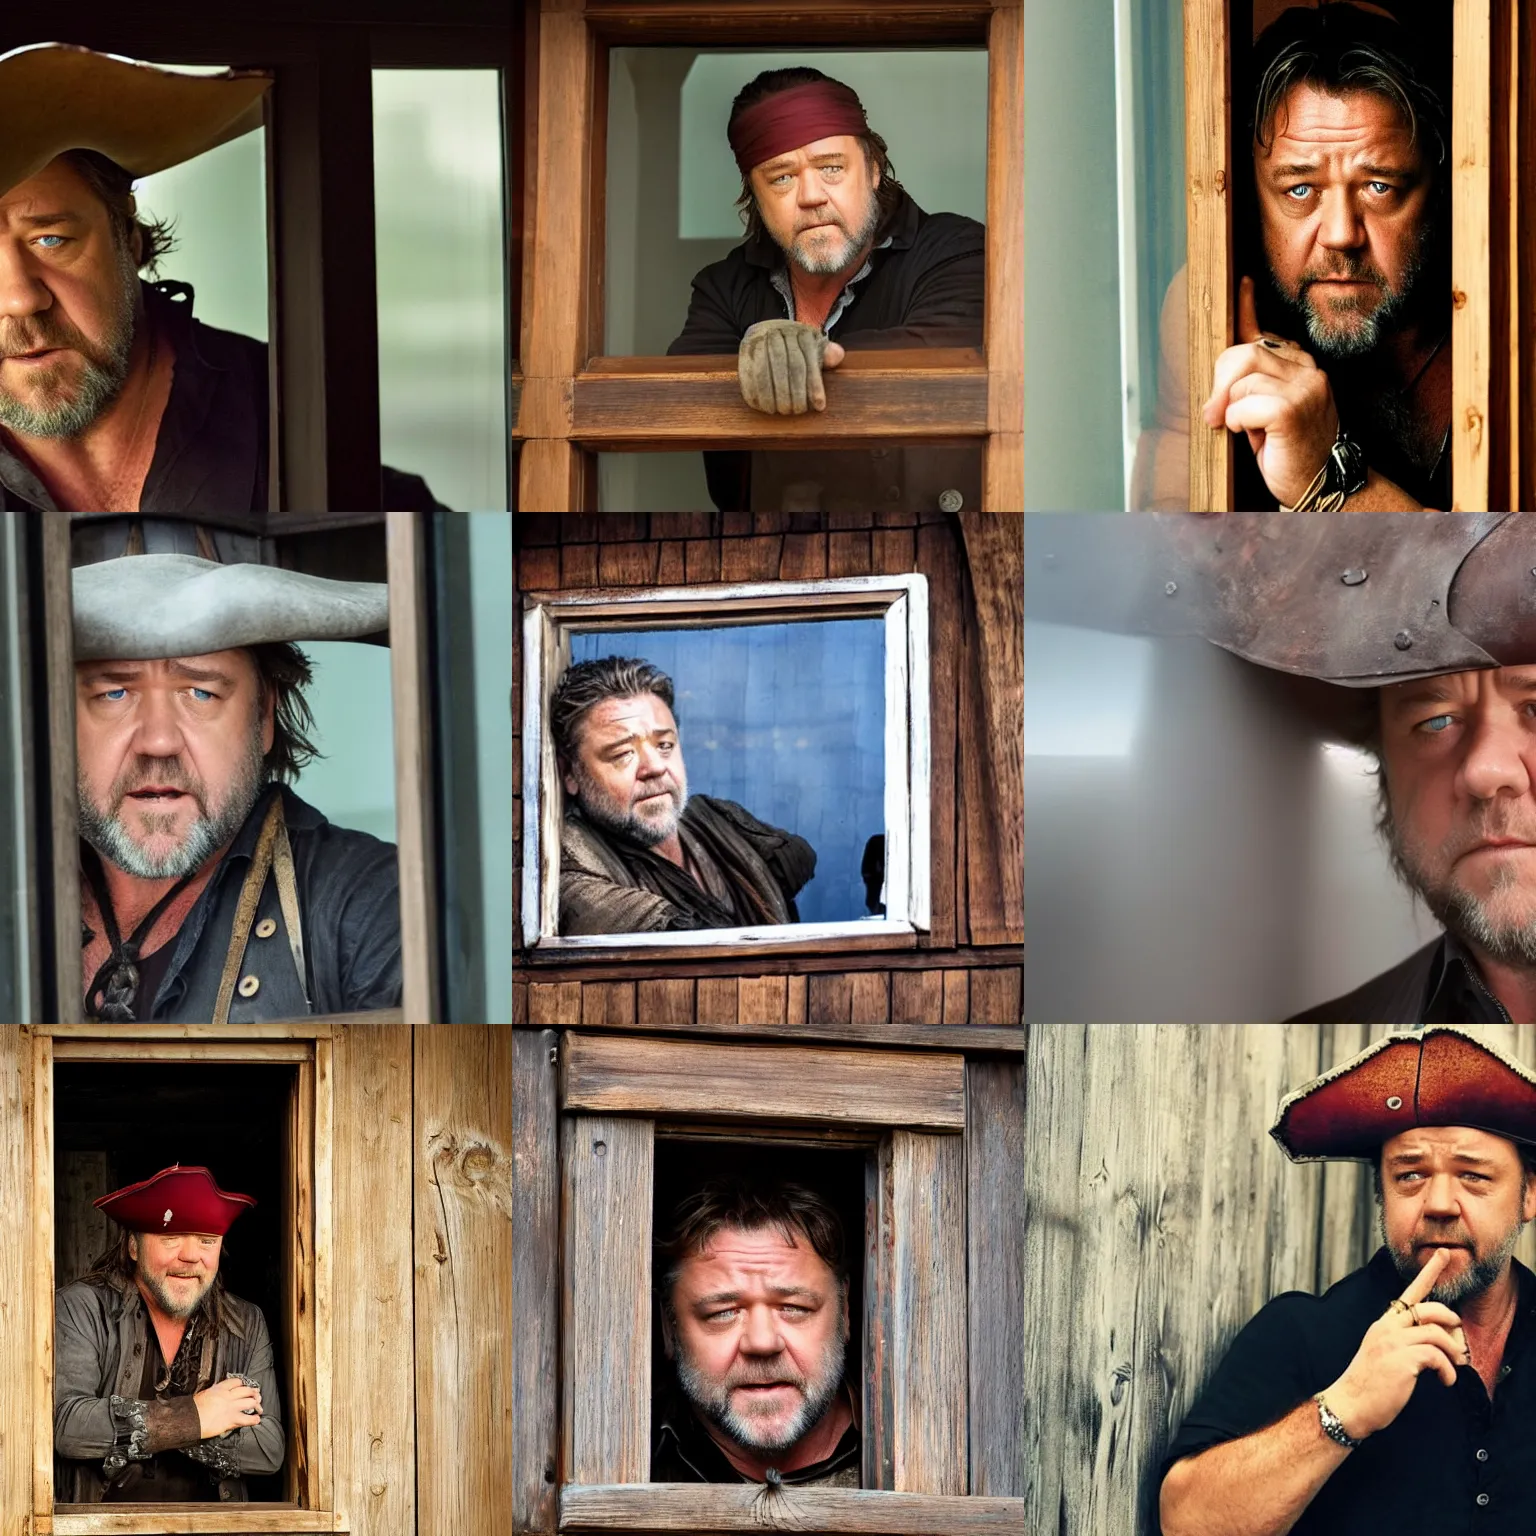 Prompt: russell crowe with large pirate hat peering out concerned down to camera from a small glass window in a wooden wall